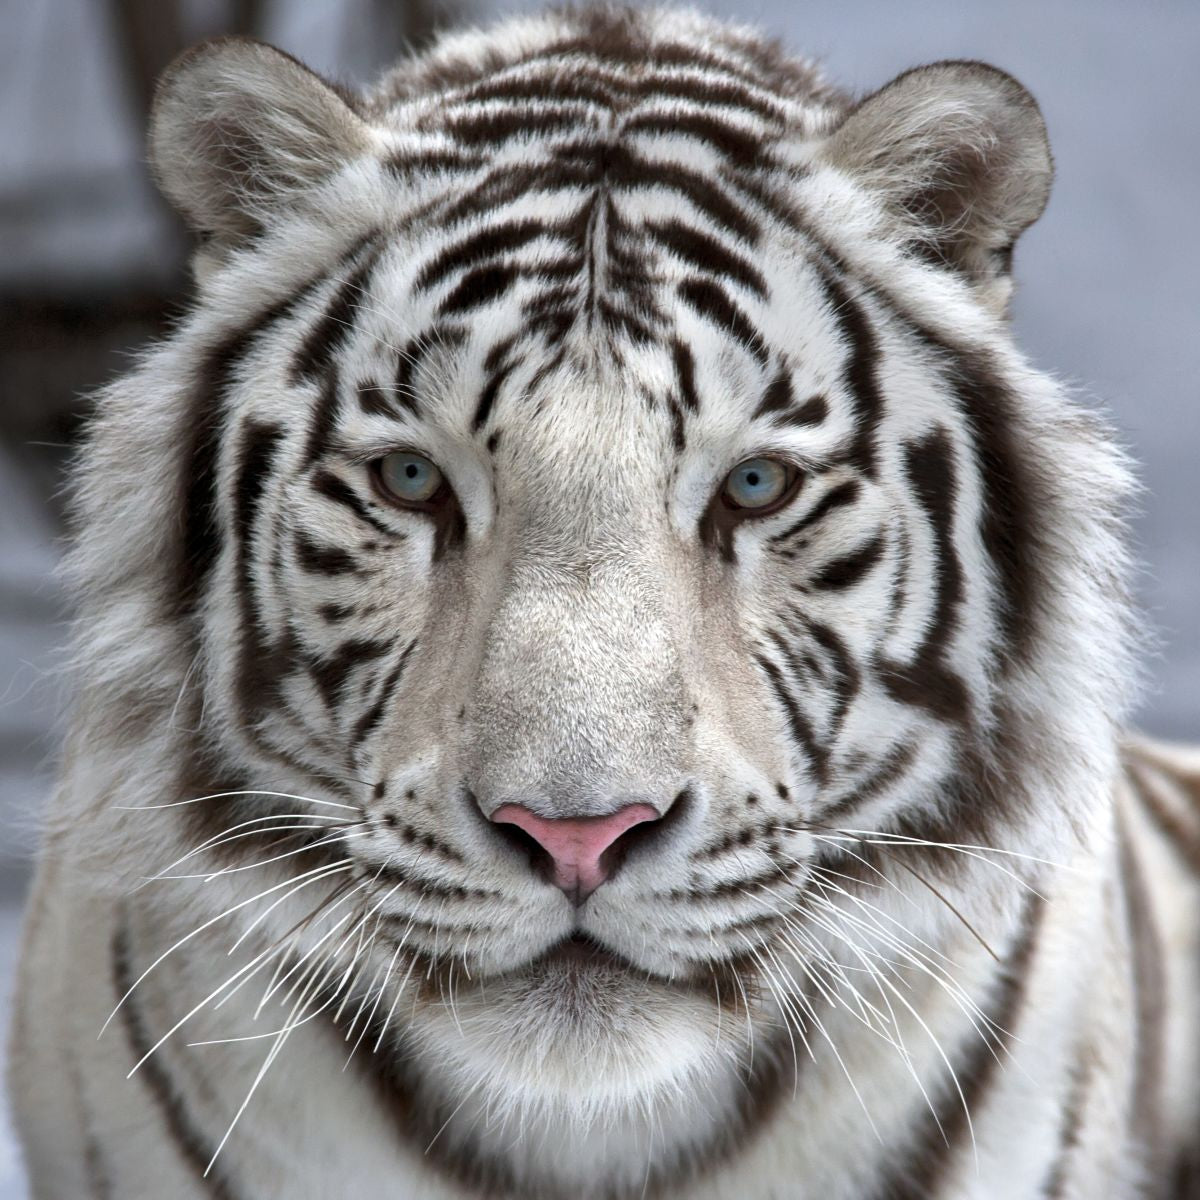 The White Bengal Tiger - Project Endangered Tigers